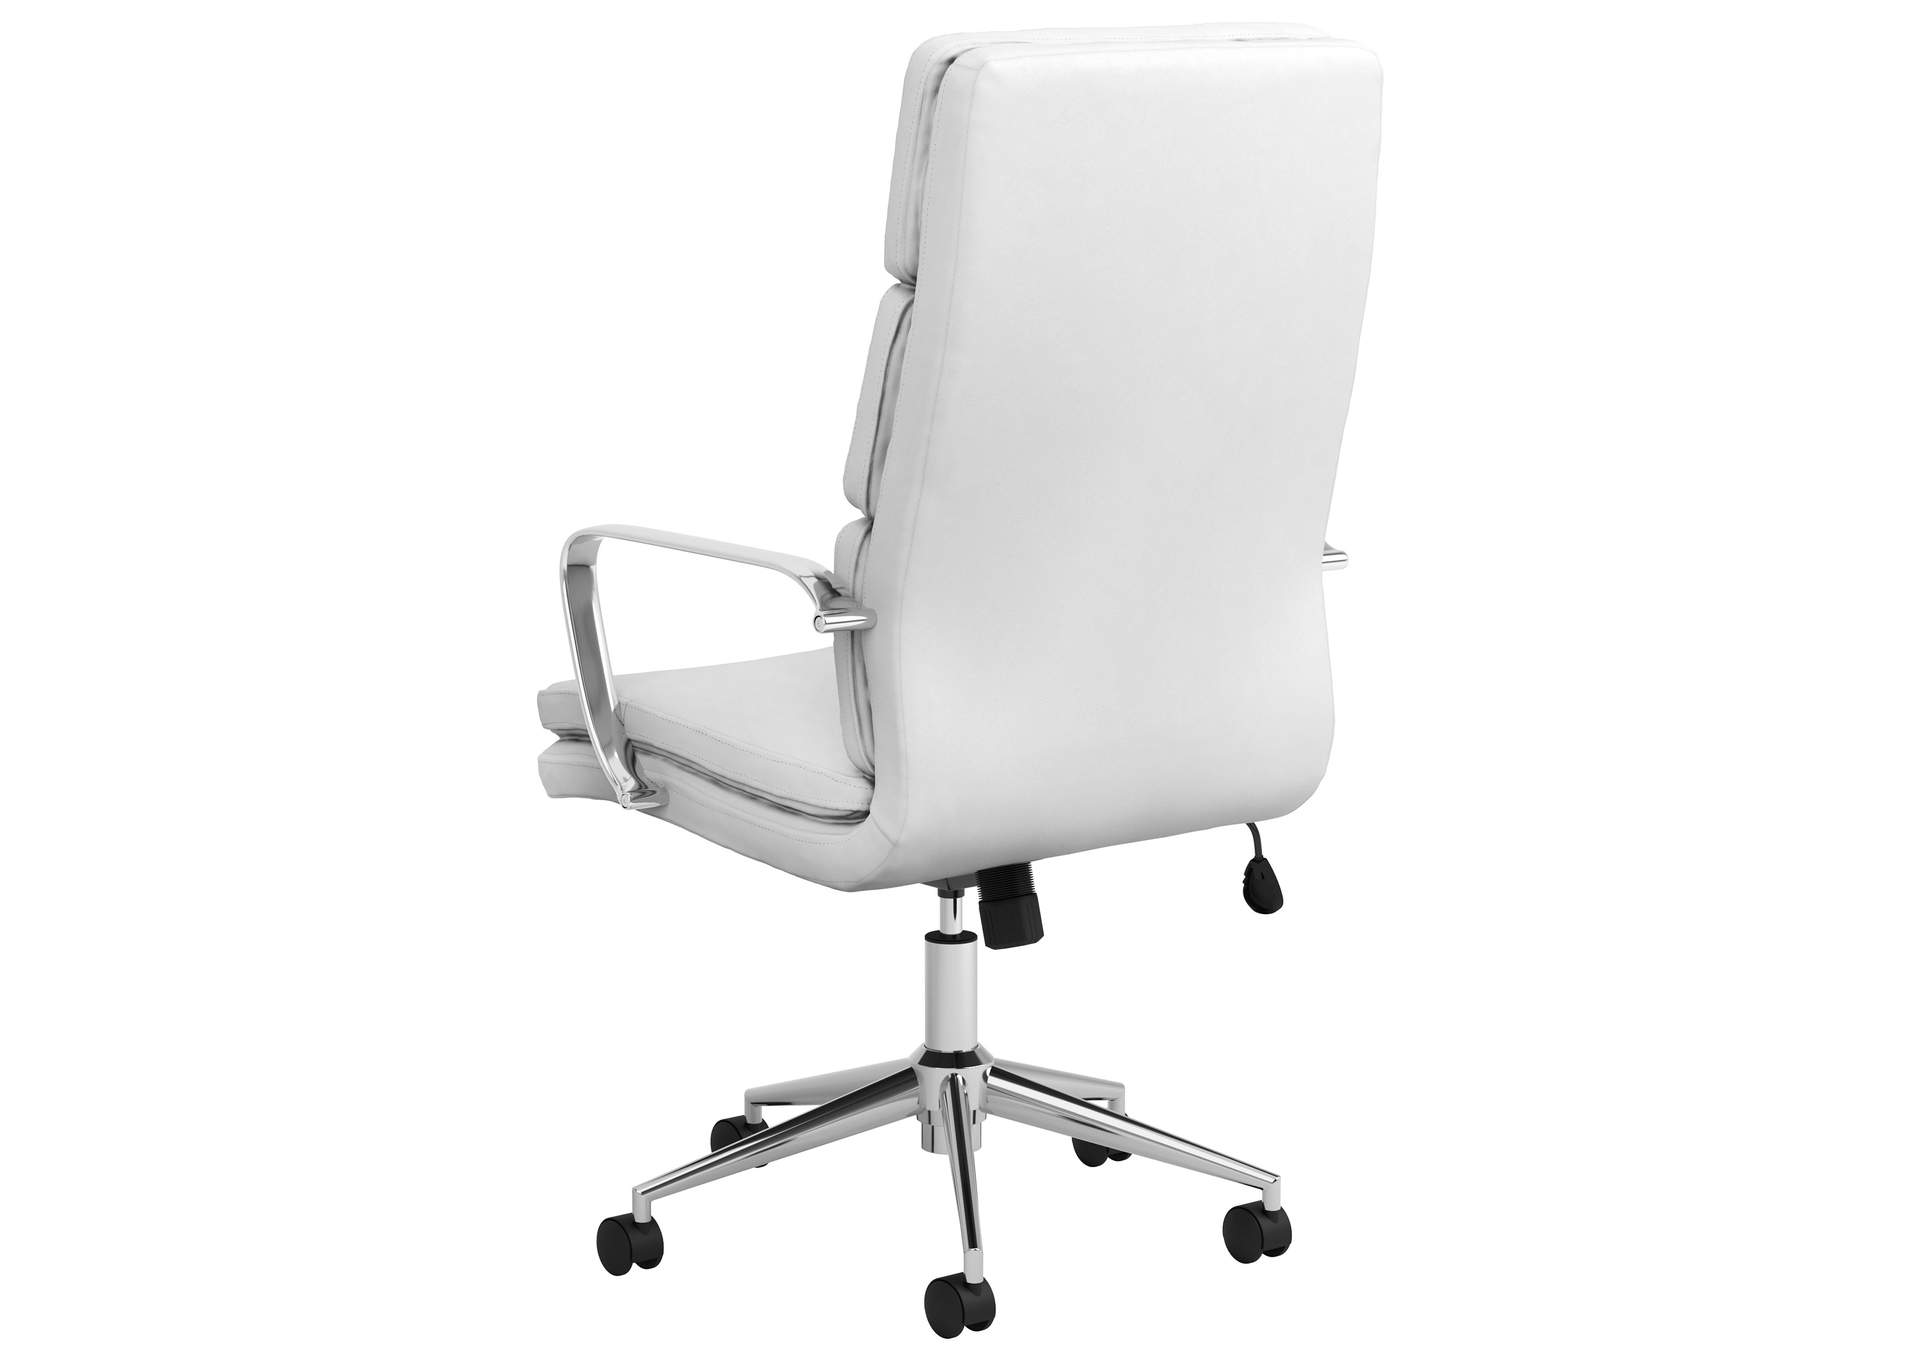 Ximena High Back Upholstered Office Chair White,Coaster Furniture